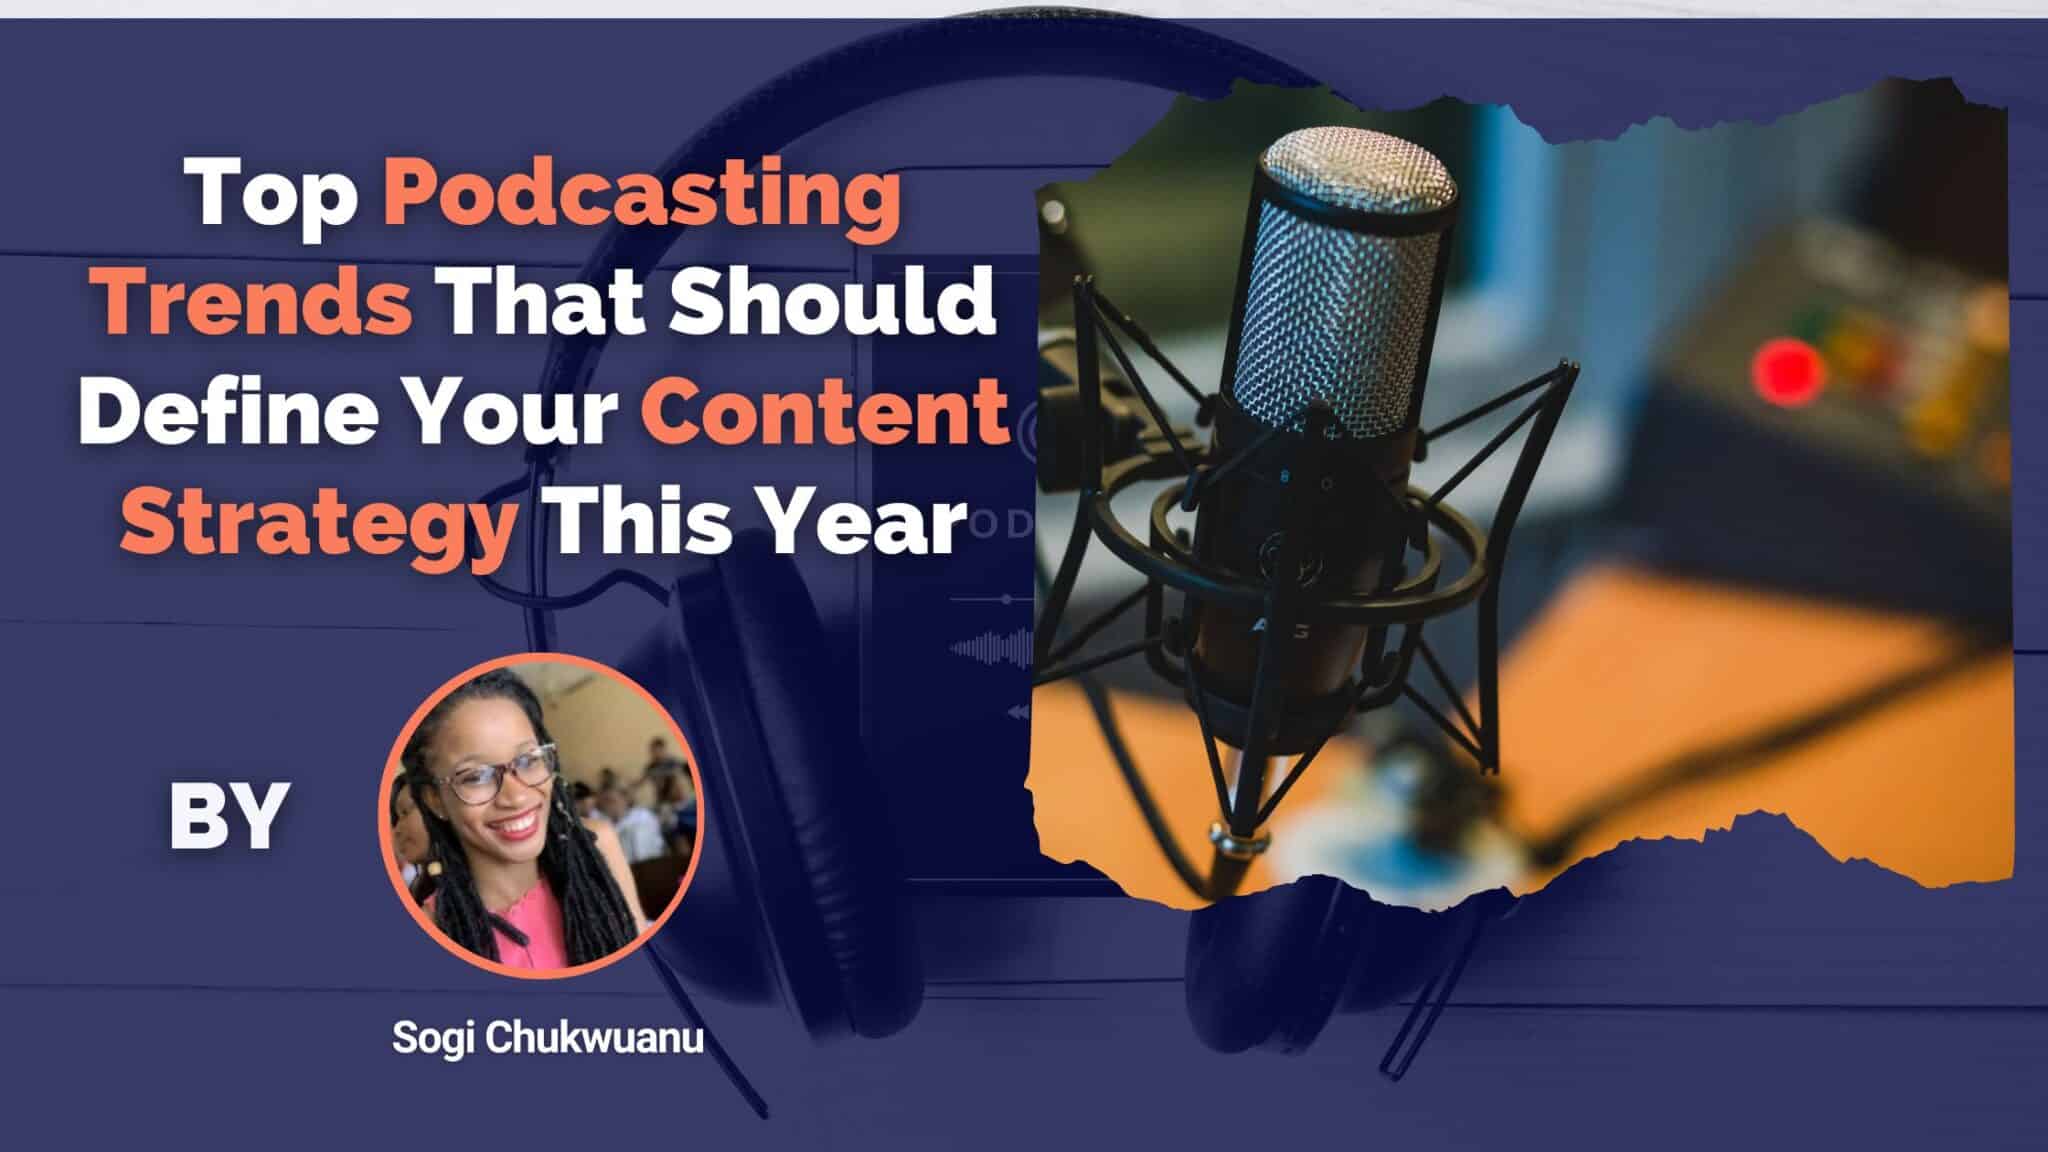 Top Podcasting Trends That Should Define Your Content Strategy This Year